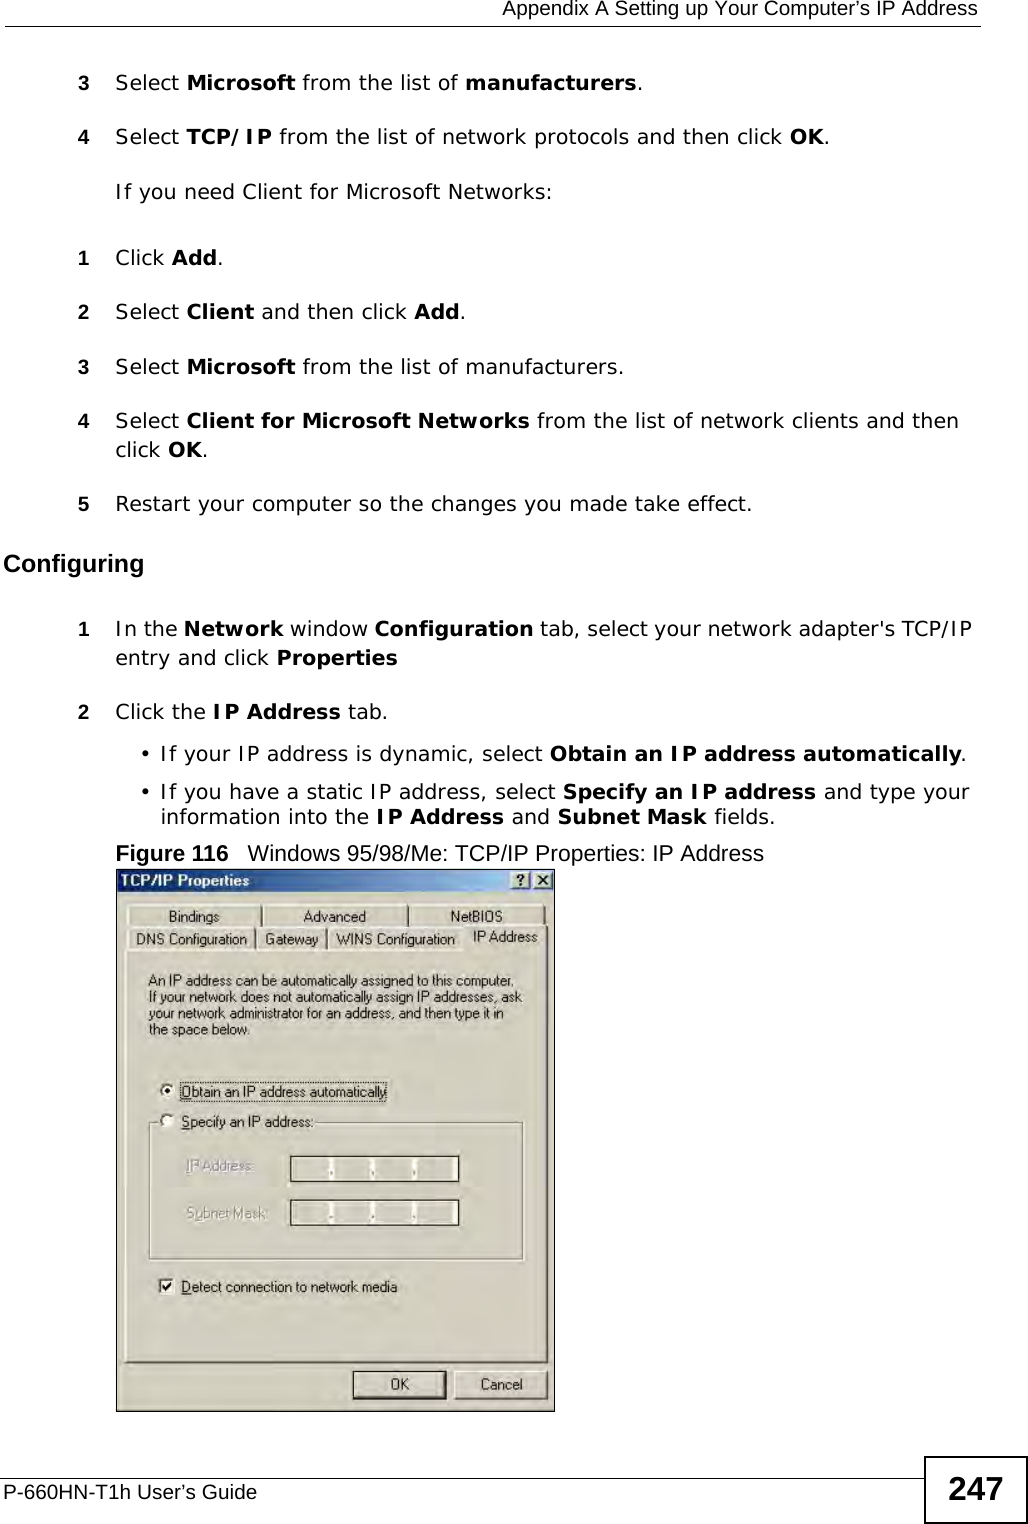  Appendix A Setting up Your Computer’s IP AddressP-660HN-T1h User’s Guide 2473Select Microsoft from the list of manufacturers.4Select TCP/IP from the list of network protocols and then click OK.If you need Client for Microsoft Networks:1Click Add.2Select Client and then click Add.3Select Microsoft from the list of manufacturers.4Select Client for Microsoft Networks from the list of network clients and then click OK.5Restart your computer so the changes you made take effect.Configuring 1In the Network window Configuration tab, select your network adapter&apos;s TCP/IP entry and click Properties2Click the IP Address tab.• If your IP address is dynamic, select Obtain an IP address automatically. • If you have a static IP address, select Specify an IP address and type your information into the IP Address and Subnet Mask fields.Figure 116   Windows 95/98/Me: TCP/IP Properties: IP Address